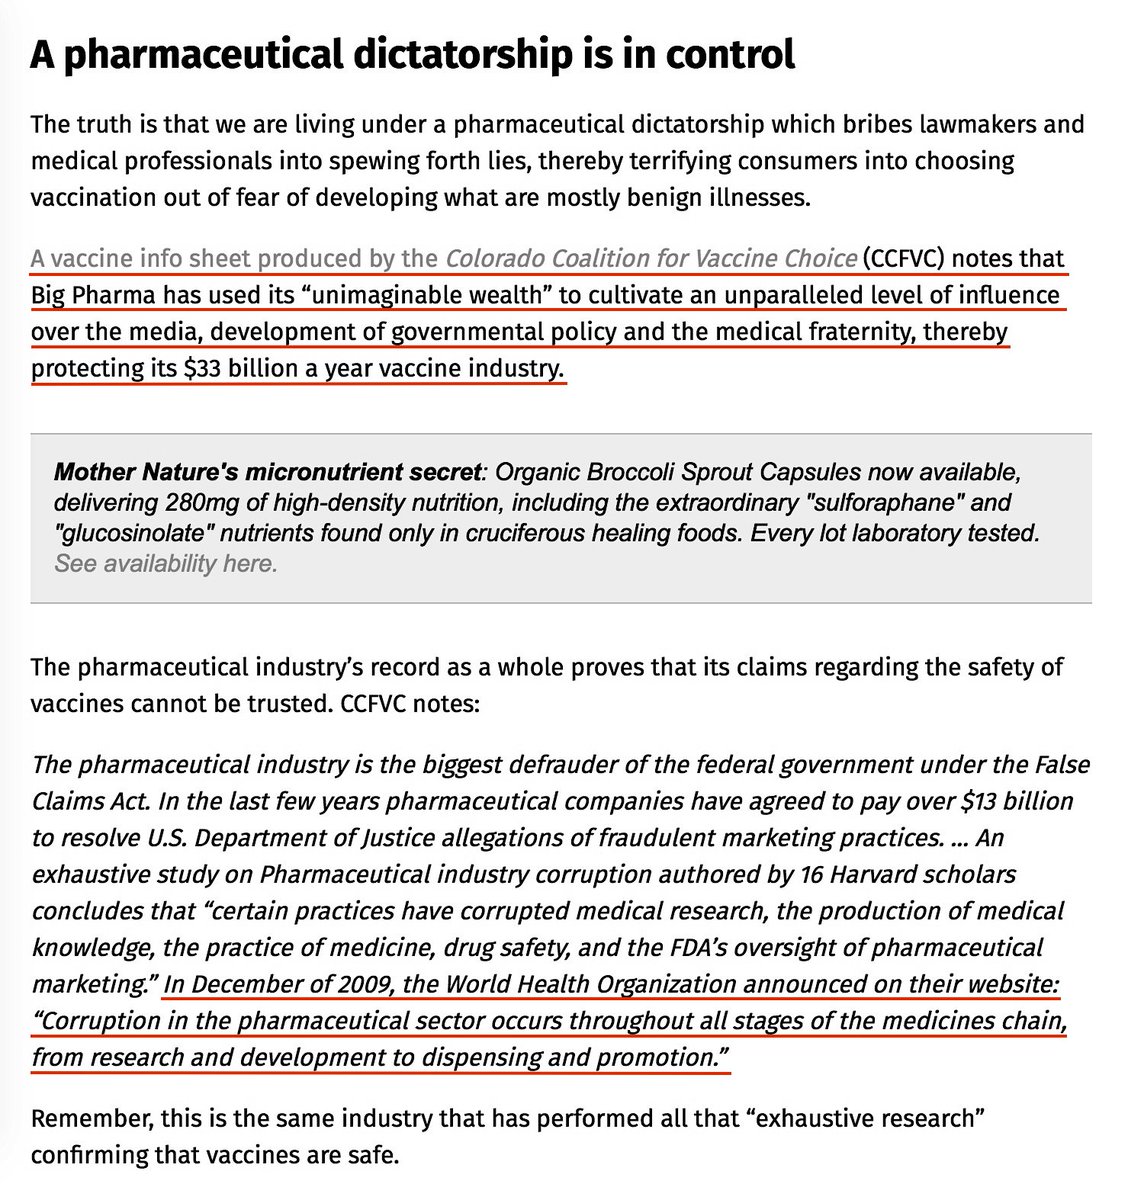 It's A Pharmaceutical Dictatorship Which Bribes Lawmakers And Medical Professionals Into Spewing Forth Lies, Terrifying Consumers Into Choosing Vaccination Out Of Fear Of Developing What Are Mostly Benign Illnesses.January 18, 2019 https://www.vaccines.news/2019-01-18-there-is-a-plague-of-corruption-surrounding-vaccine-safety.html #QAnon  @potus